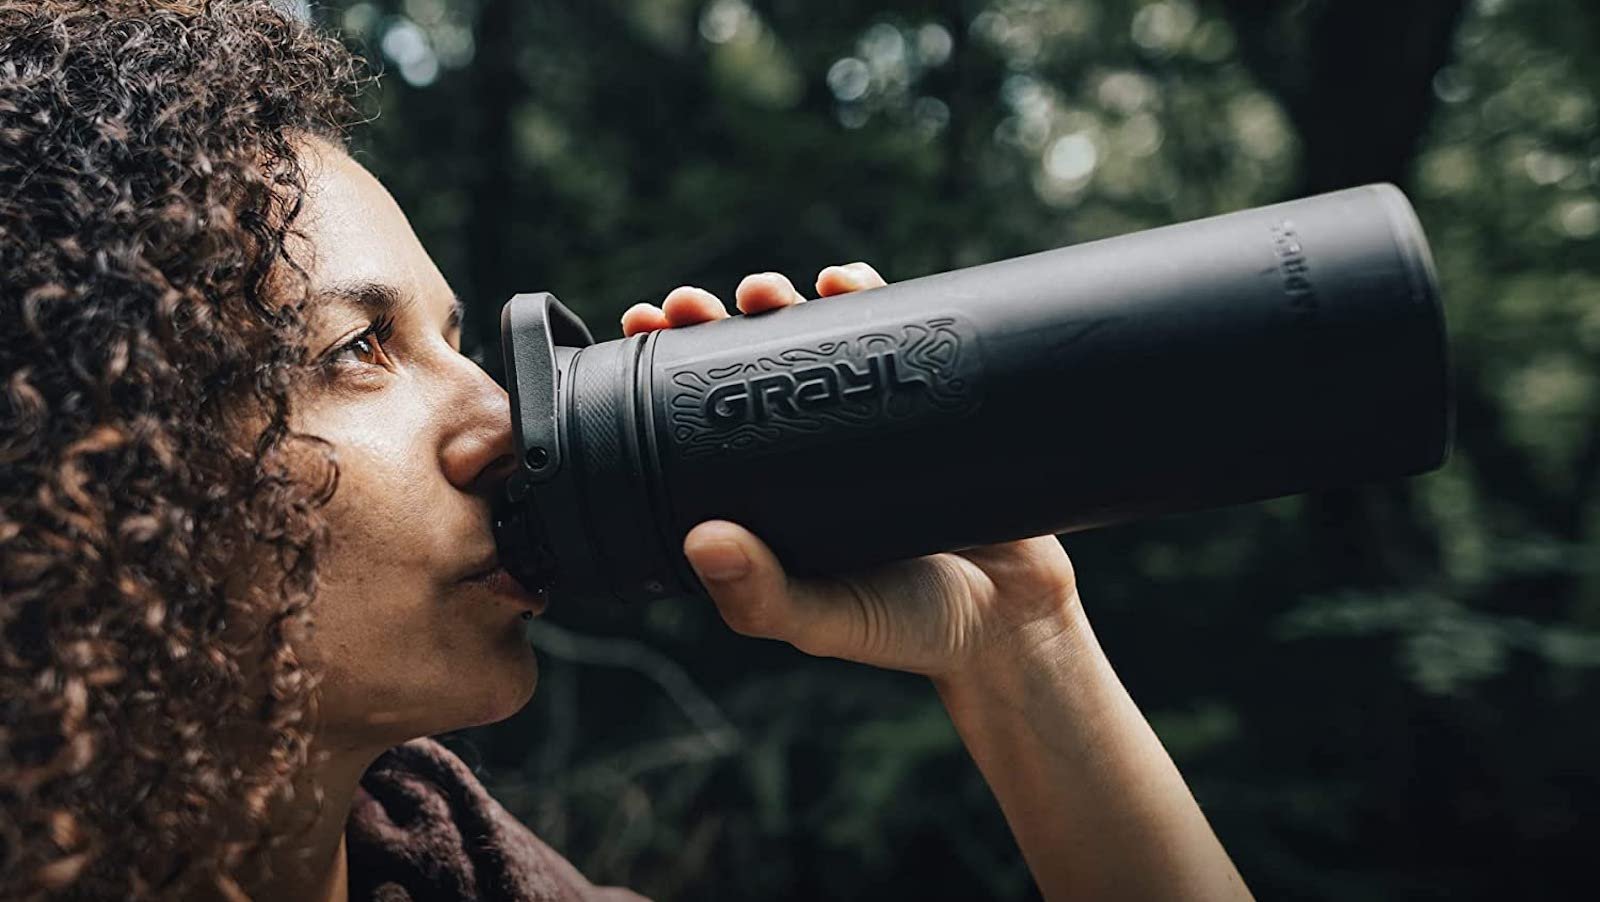 GRAYL 16.9oz UltraPress Purifier Bottle is a hiking must-have that fits in any backpack